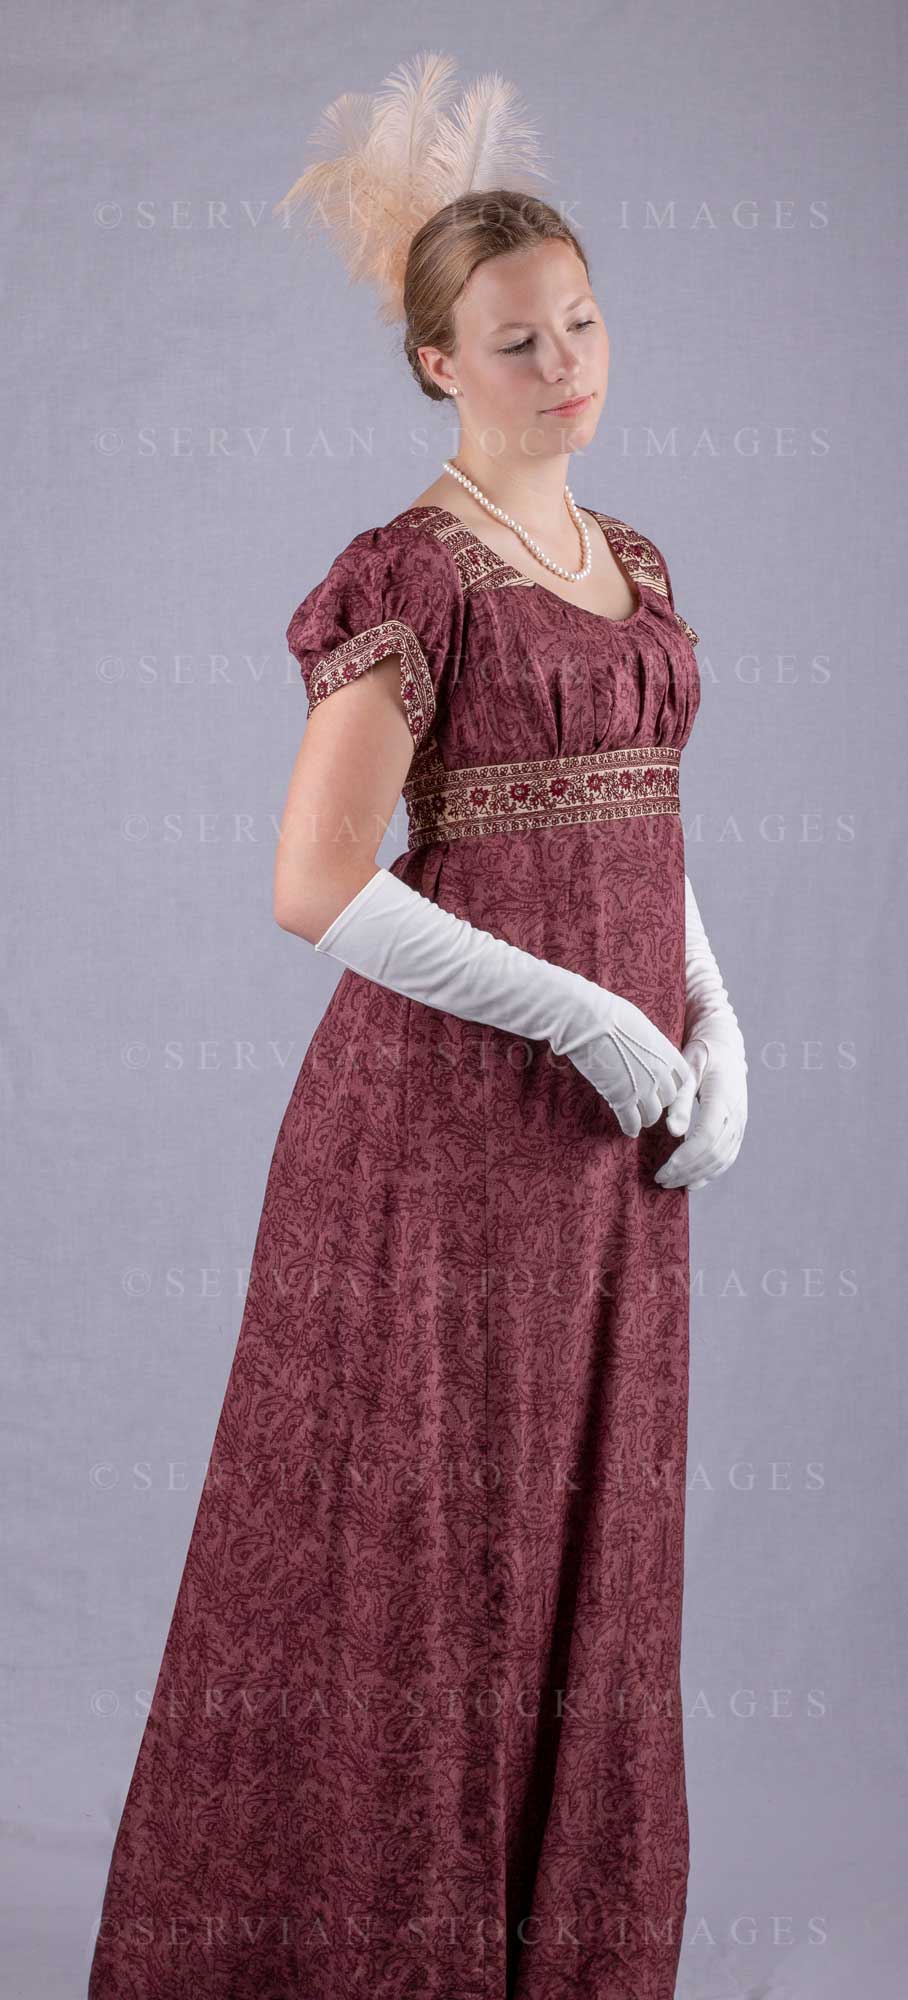 Regency woman wearing a red silk embroidered dress and long gloves (Skye 0087)